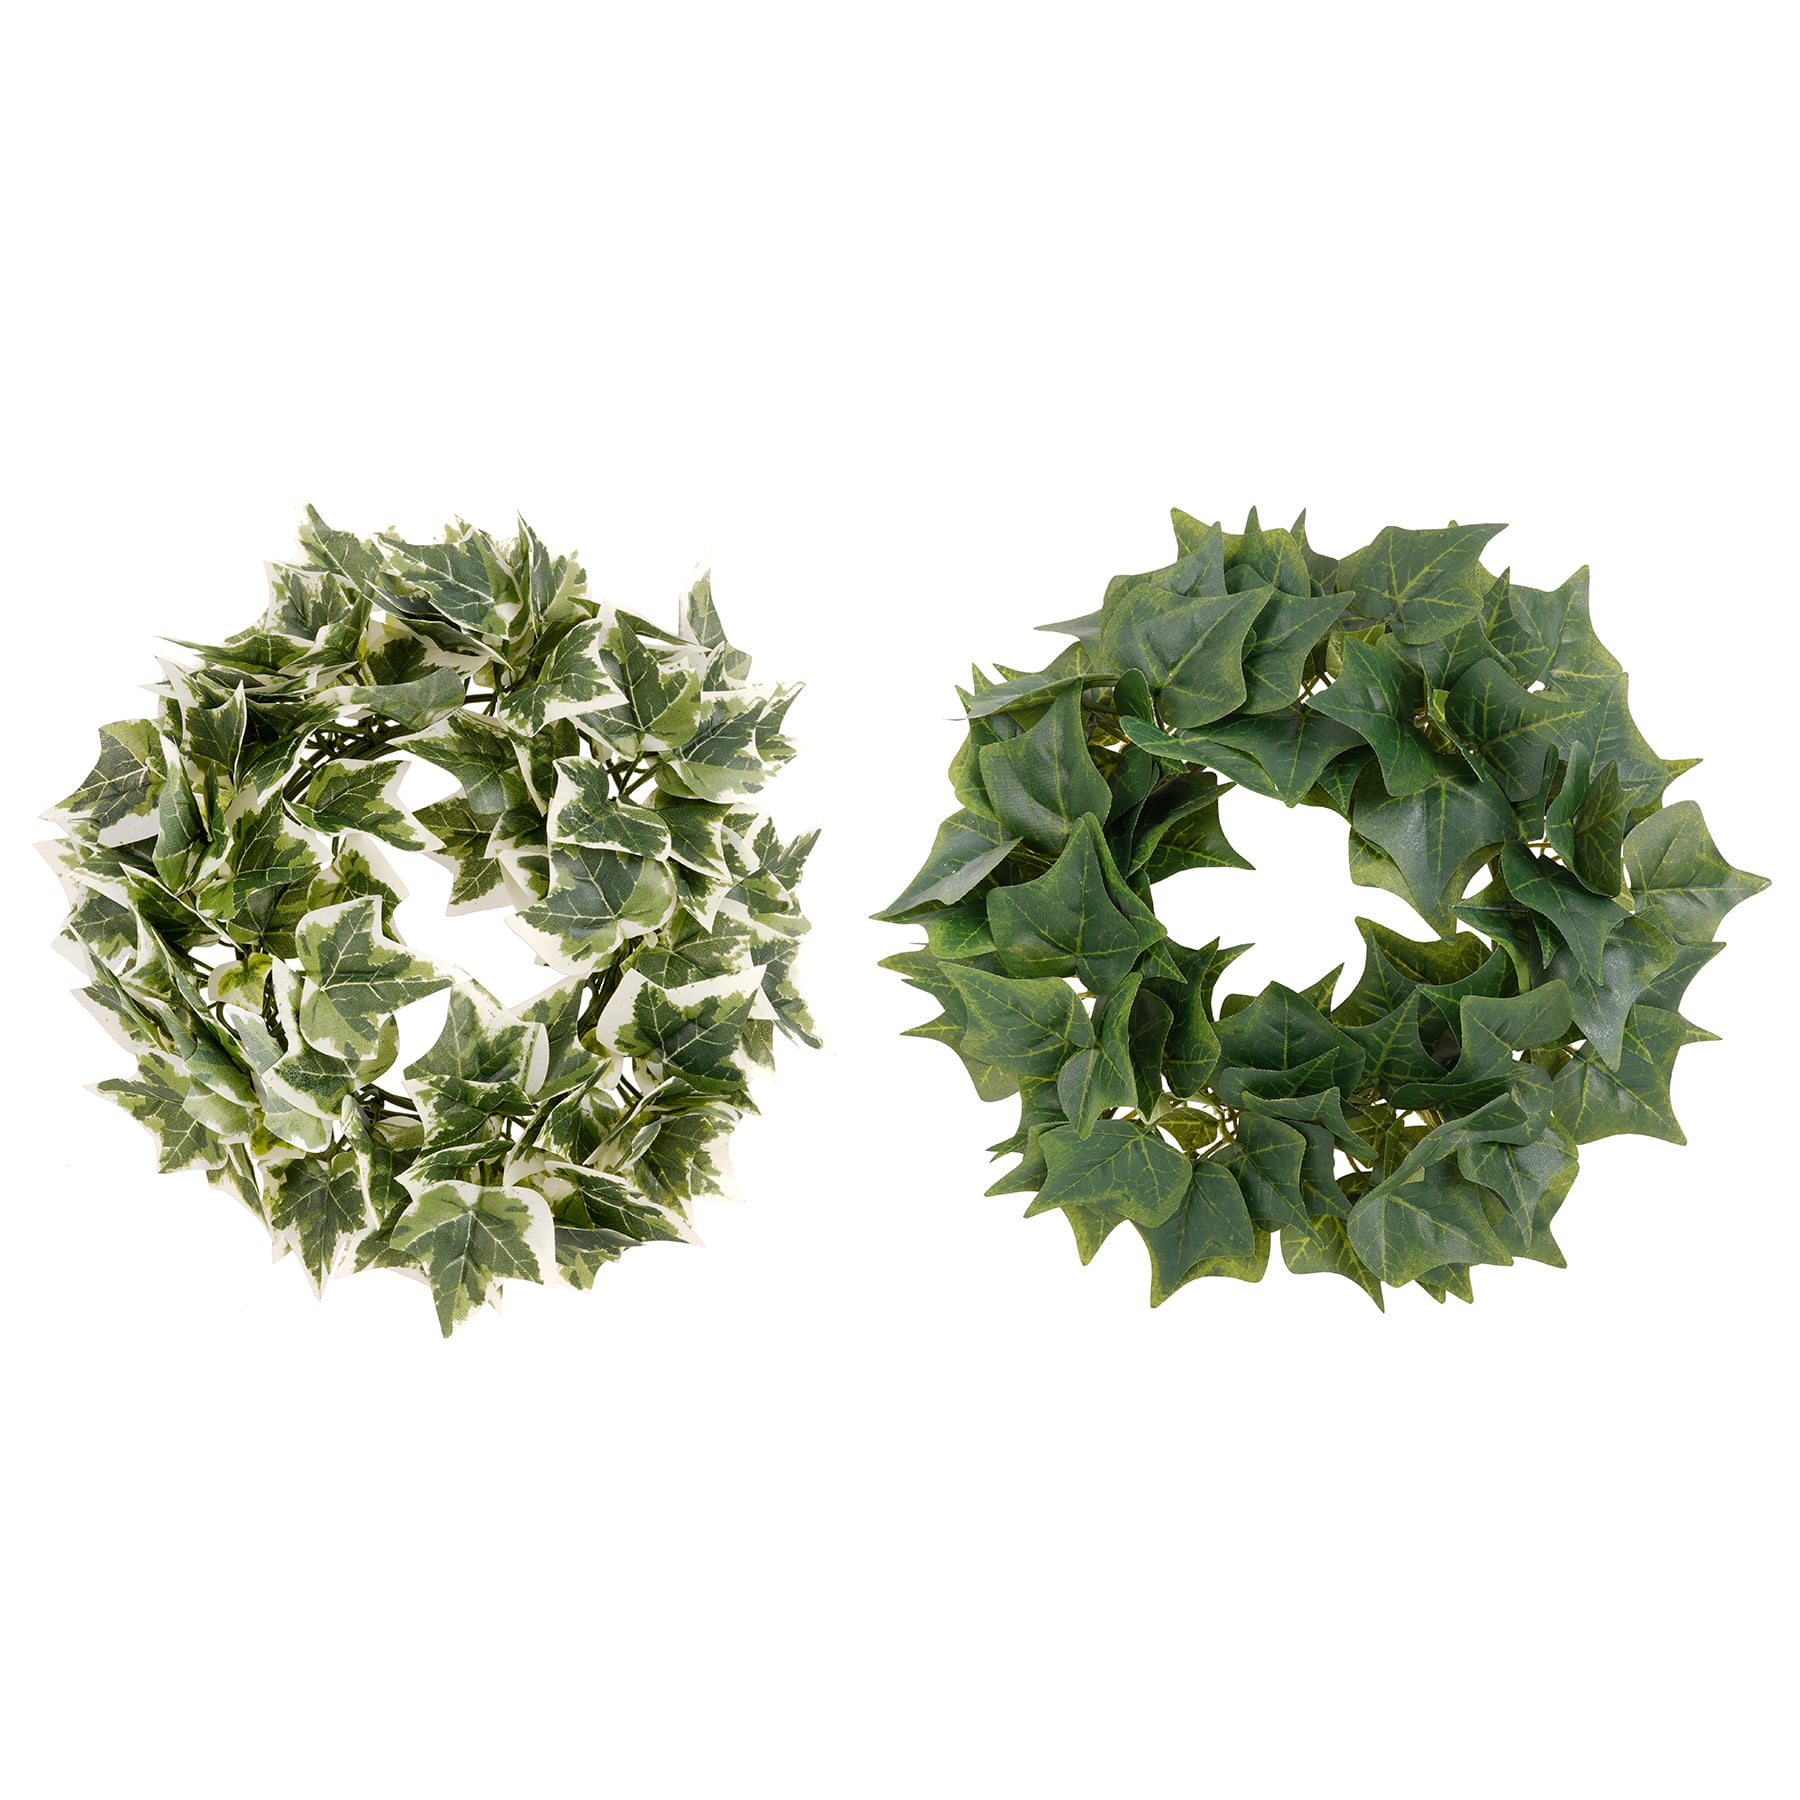 Poison IVY Halloween Garland 6ft Decorative Leaves Green Foliage 